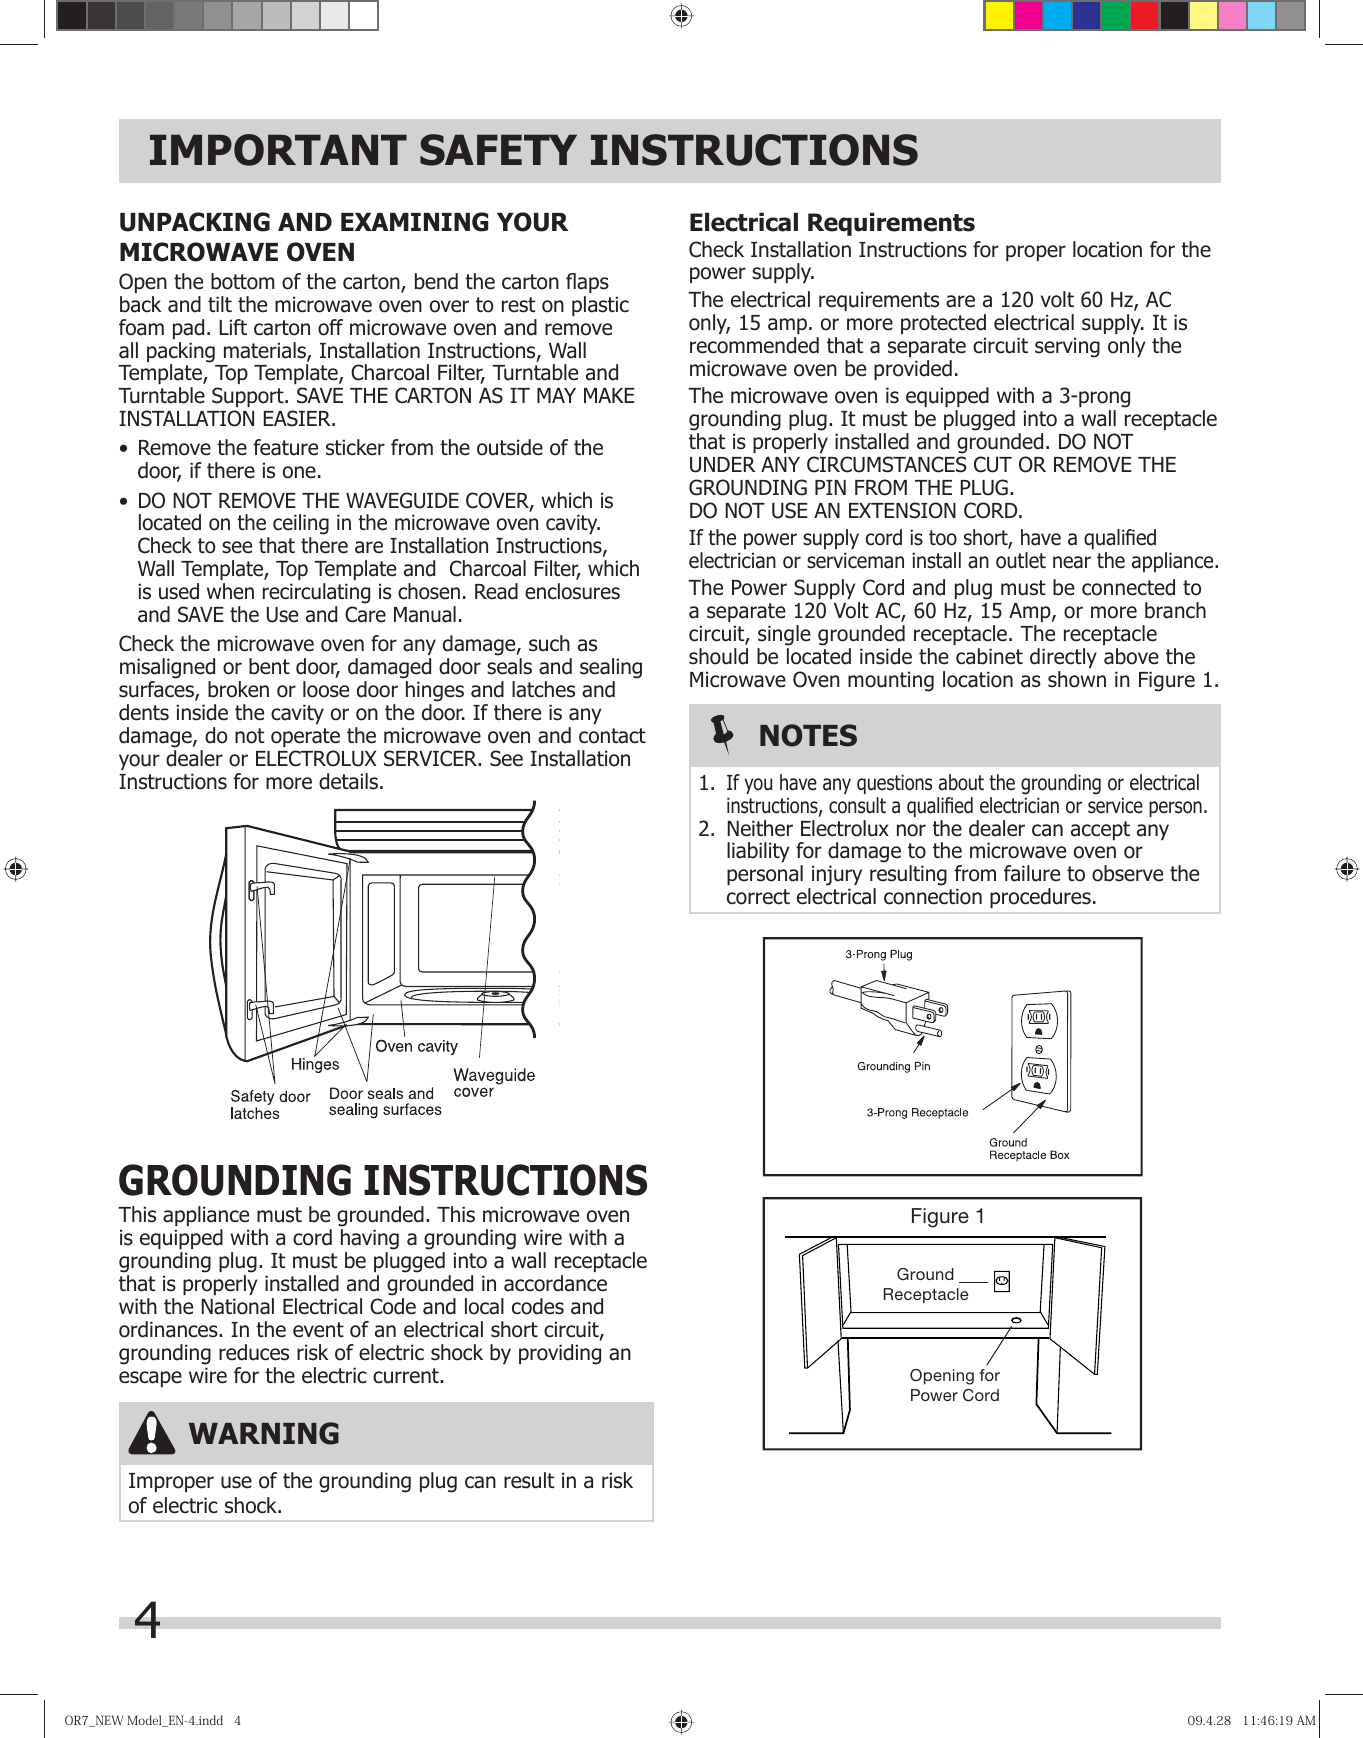 4IMPORTANT SAFETY INSTRUCTIONSElectrical RequirementsCheck Installation Instructions for proper location for the power supply.The electrical requirements are a 120 volt 60 Hz, AC only, 15 amp. or more protected electrical supply. It is recommended that a separate circuit serving only the microwave oven be provided.The microwave oven is equipped with a 3-prong grounding plug. It must be plugged into a wall receptacle that is properly installed and grounded. DO NOT UNDER ANY CIRCUMSTANCES CUT OR REMOVE THE GROUNDING PIN FROM THE PLUG. DO NOT USE AN EXTENSION CORD.If the power supply cord is too short, have a qualiﬁ ed electrician or serviceman install an outlet near the appliance.The Power Supply Cord and plug must be connected to a separate 120 Volt AC, 60 Hz, 15 Amp, or more branch circuit, single grounded receptacle. The receptacle should be located inside the cabinet directly above the Microwave Oven mounting location as shown in Figure 1.Figure 1GroundReceptacleOpening forPower CordWARNINGImproper use of the grounding plug can result in a risk of electric shock.NOTES1. If you have any questions about the grounding or electrical instructions, consult a qualiﬁ ed electrician or service person.2.  Neither Electrolux nor the dealer can accept any liability for damage to the microwave oven or personal injury resulting from failure to observe the correct electrical connection procedures.GROUNDING INSTRUCTIONSThis appliance must be grounded. This microwave oven is equipped with a cord having a grounding wire with a grounding plug. It must be plugged into a wall receptacle that is properly installed and grounded in accordance with the National Electrical Code and local codes and ordinances. In the event of an electrical short circuit, grounding reduces risk of electric shock by providing an escape wire for the electric current.UNPACKING AND EXAMINING YOUR MICROWAVE OVENOpen the bottom of the carton, bend the carton ﬂ aps back and tilt the microwave oven over to rest on plastic foam pad. Lift carton off microwave oven and remove all packing materials, Installation Instructions, Wall Template, Top Template, Charcoal Filter, Turntable and Turntable Support. SAVE THE CARTON AS IT MAY MAKE INSTALLATION EASIER.•  Remove the feature sticker from the outside of the door, if there is one.•  DO NOT REMOVE THE WAVEGUIDE COVER, which is located on the ceiling in the microwave oven cavity. Check to see that there are Installation Instructions, Wall Template, Top Template and  Charcoal Filter, which is used when recirculating is chosen. Read enclosures and SAVE the Use and Care Manual.Check the microwave oven for any damage, such as misaligned or bent door, damaged door seals and sealing surfaces, broken or loose door hinges and latches and dents inside the cavity or on the door. If there is any damage, do not operate the microwave oven and contact your dealer or ELECTROLUX SERVICER. See Installation Instructions for more details.OR7̲NEWModel̲EN-4.indd4OR7̲NEWModel̲EN-4.indd4 09.4.2811:46:19AM09.4.2811:46:19AM